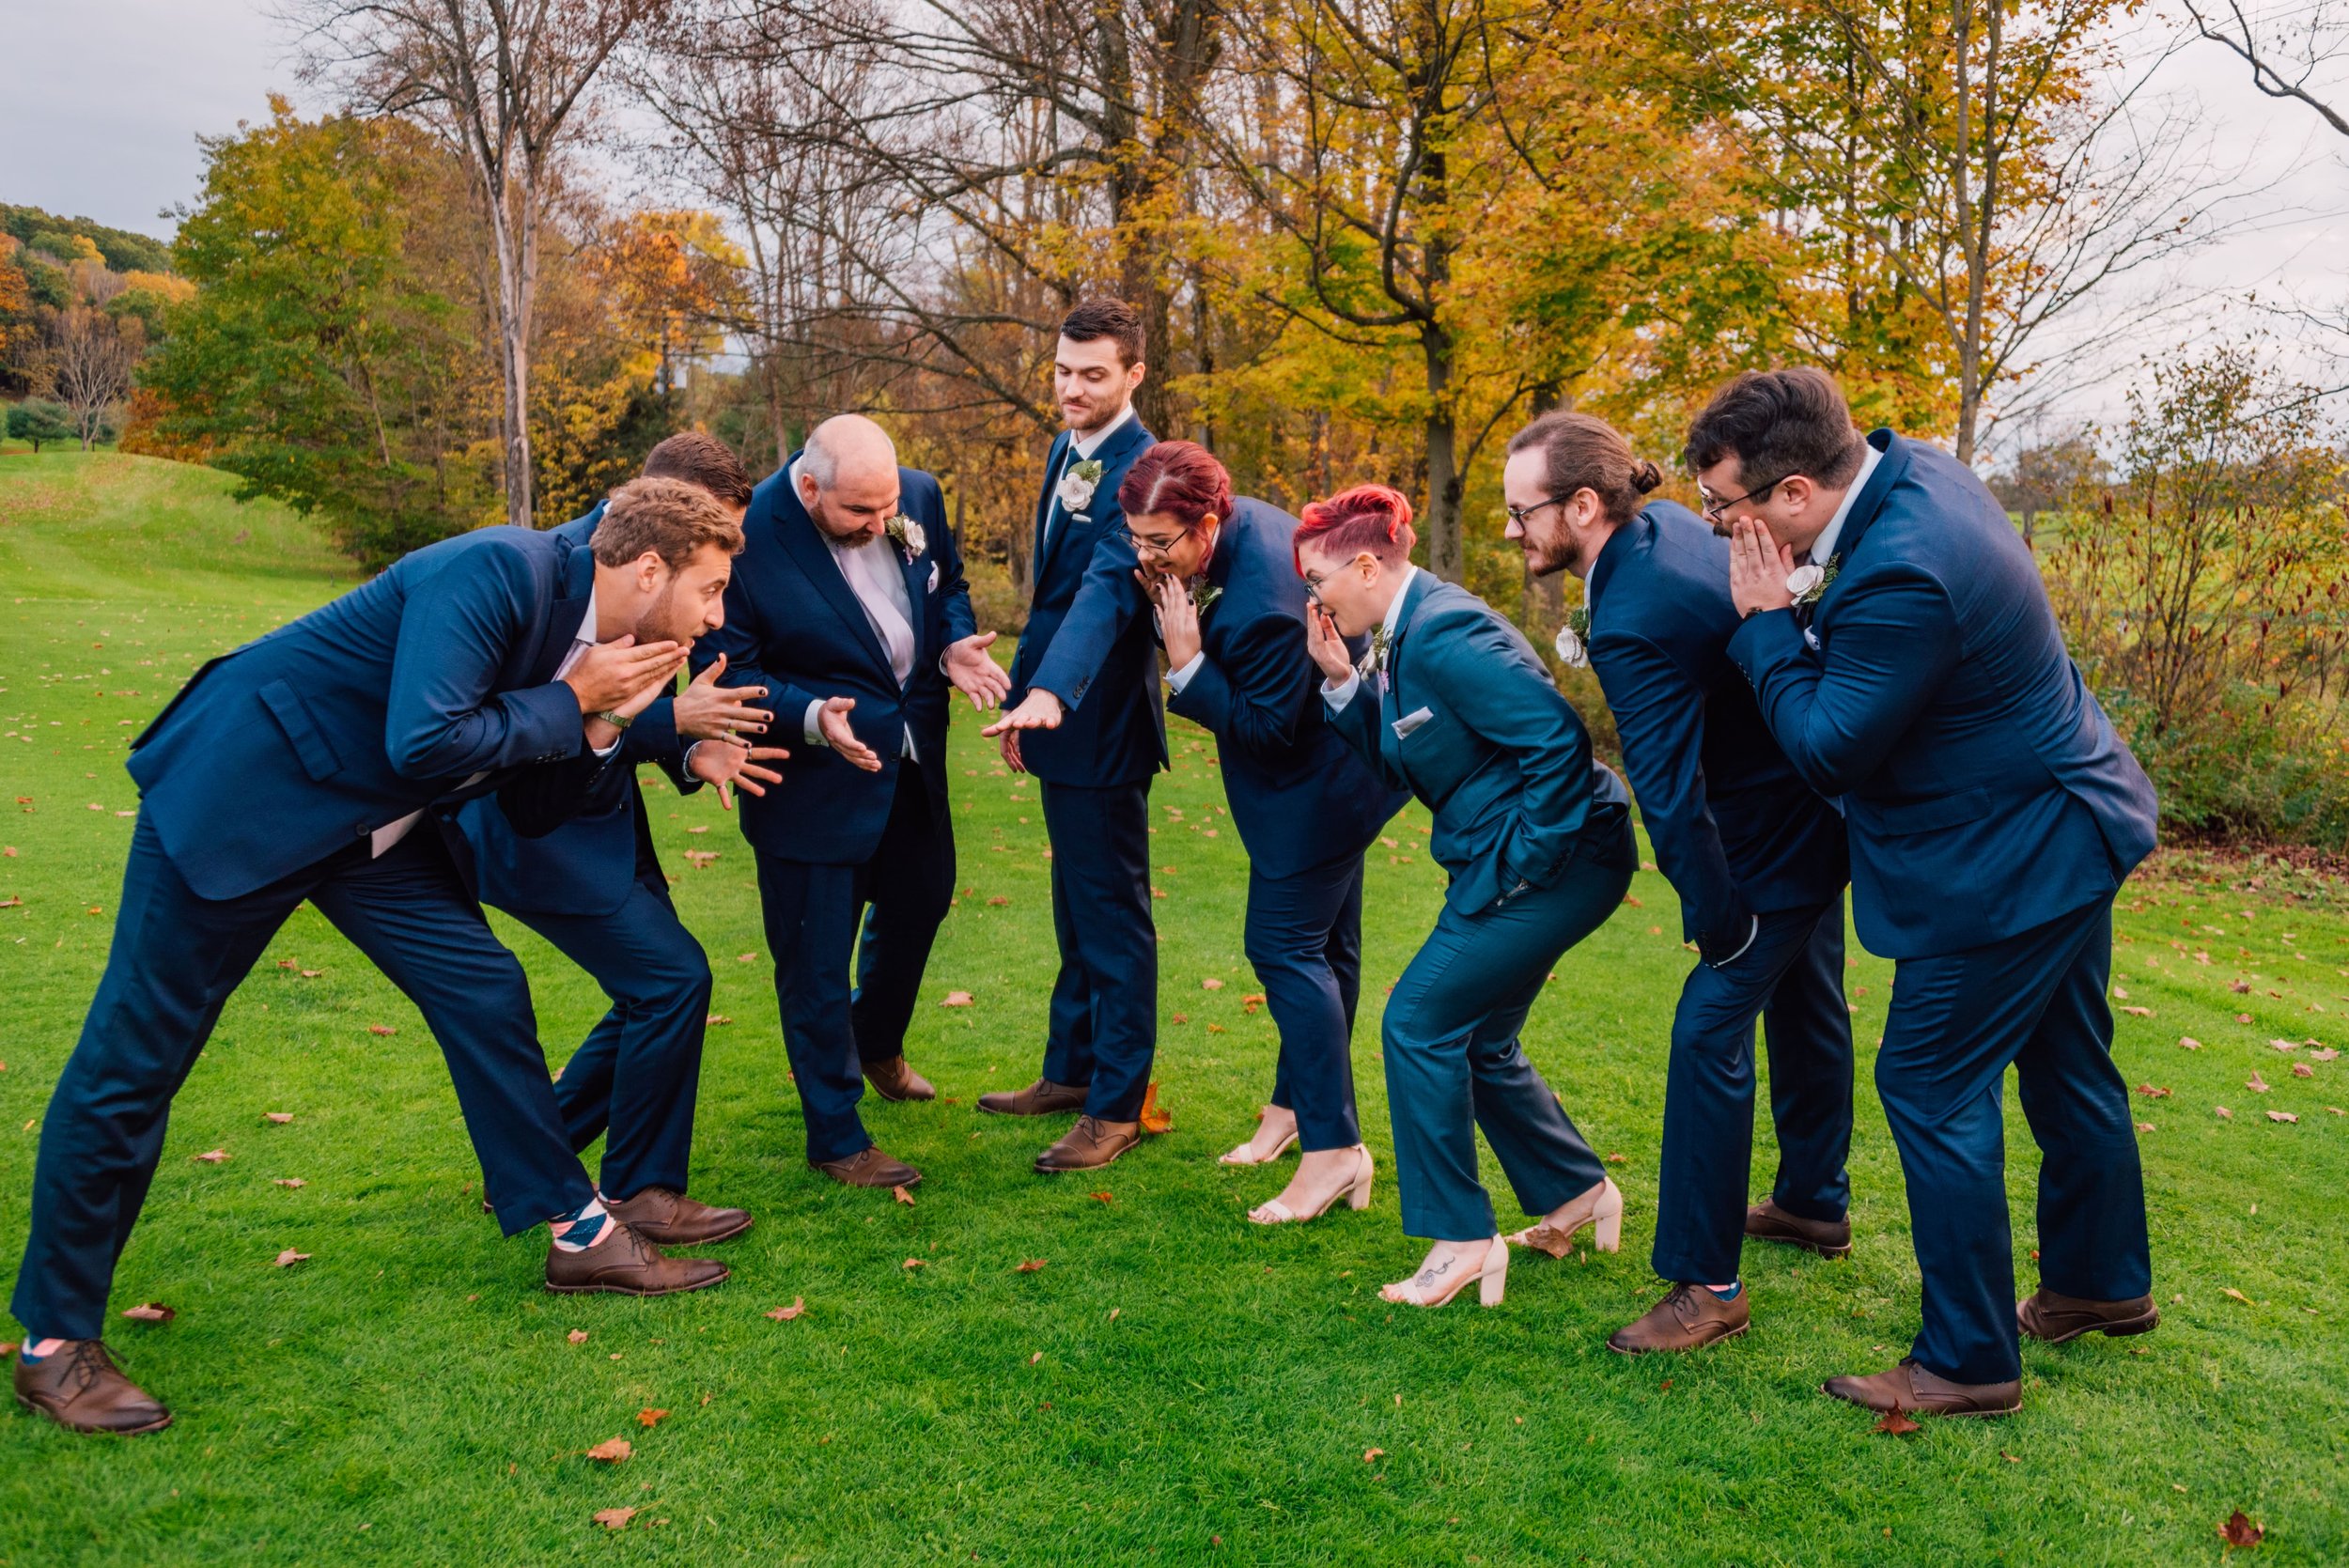  a wedding photographer captures the groom showing off his wedding ring as his groomsmen fawn over it at his fall wedding 